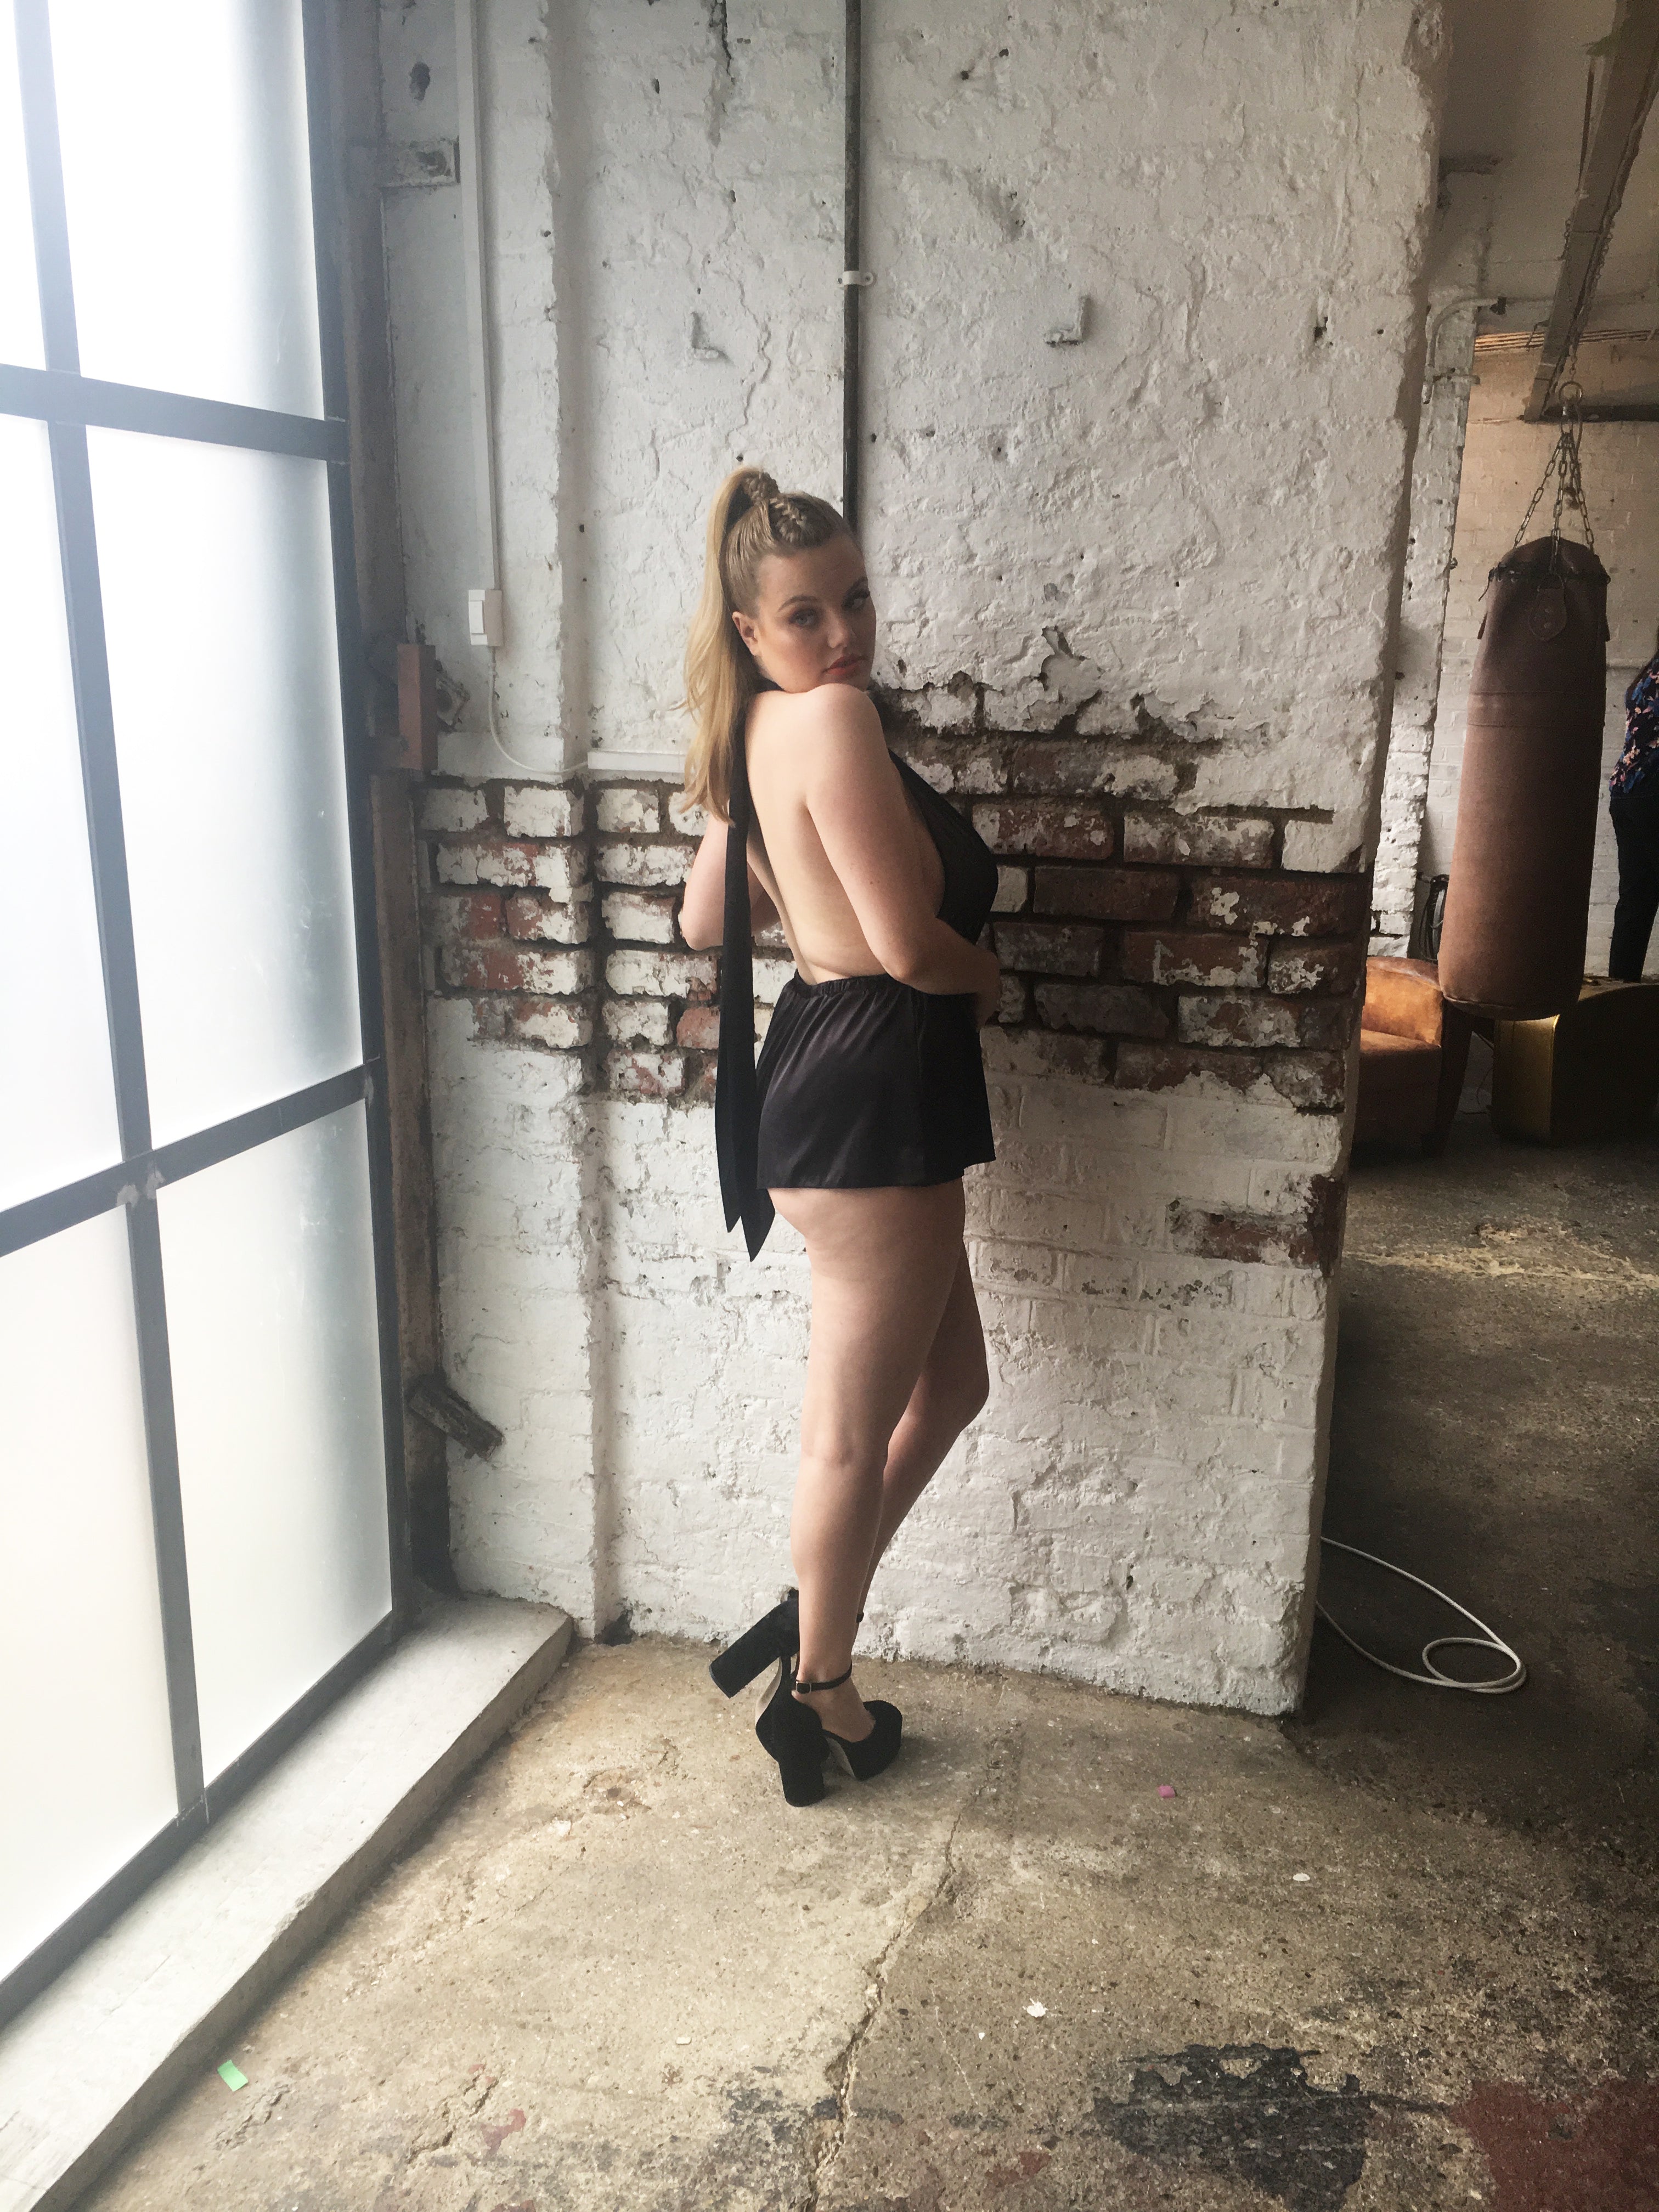 BTS Of Our SS18 Scantilly Shoot!